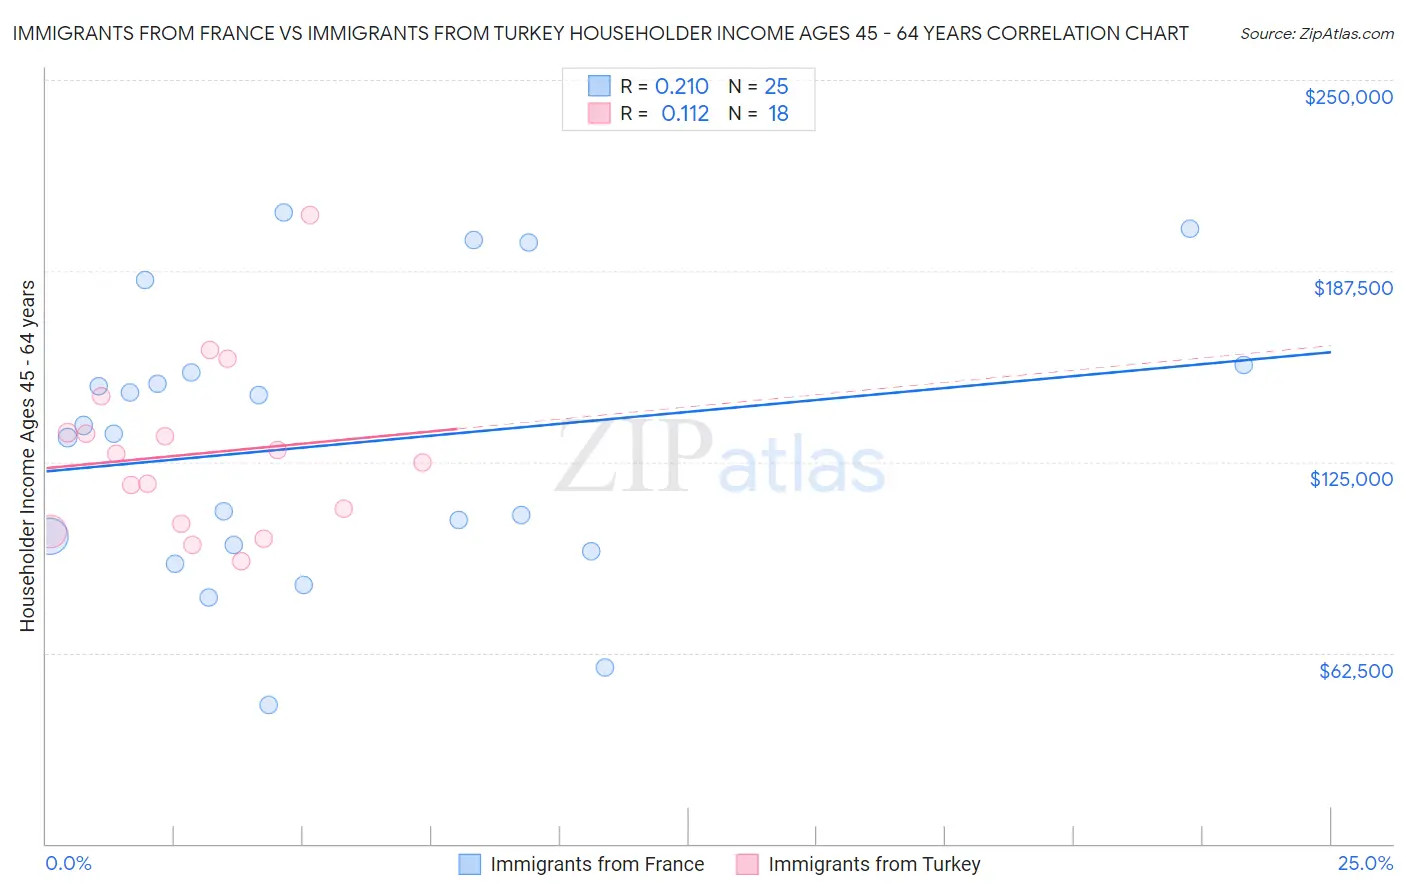 Immigrants from France vs Immigrants from Turkey Householder Income Ages 45 - 64 years